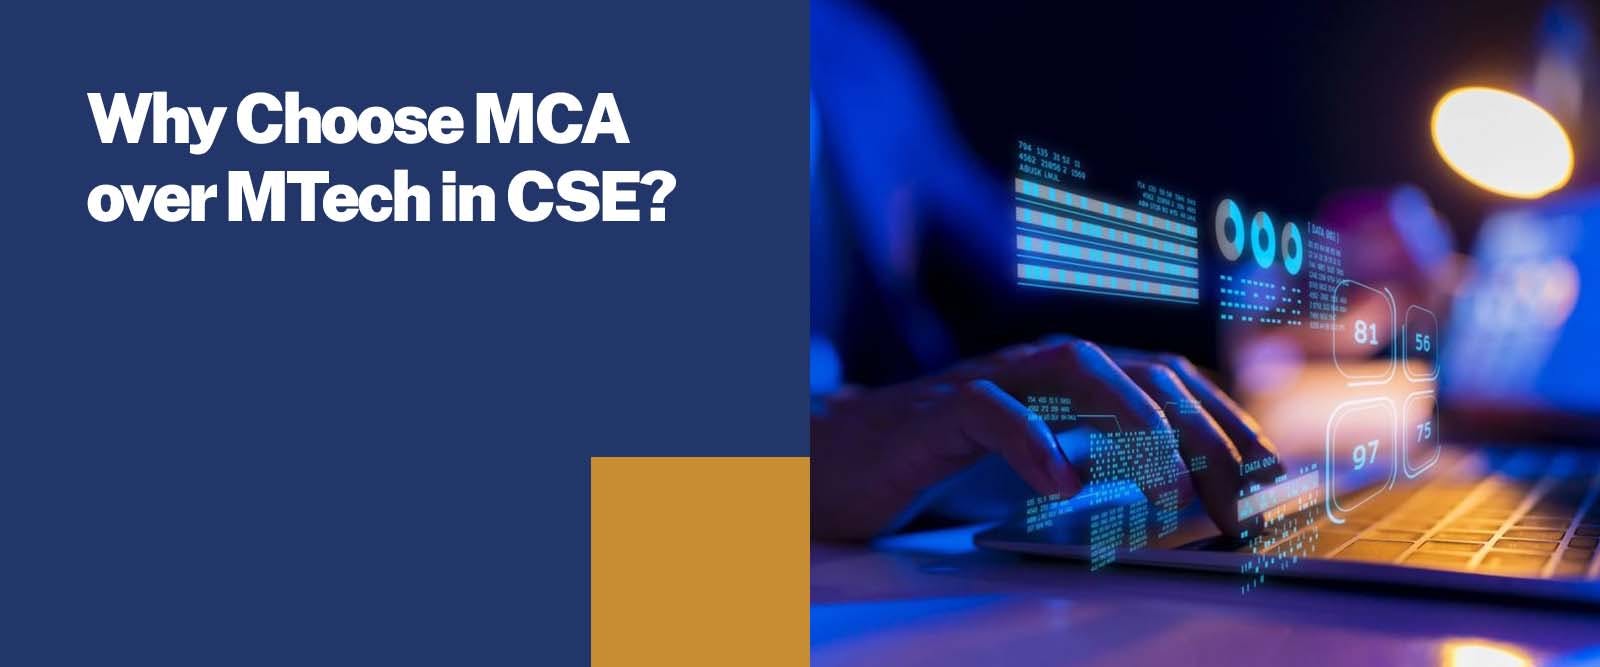 Why Choose MCA over MTech in CSE